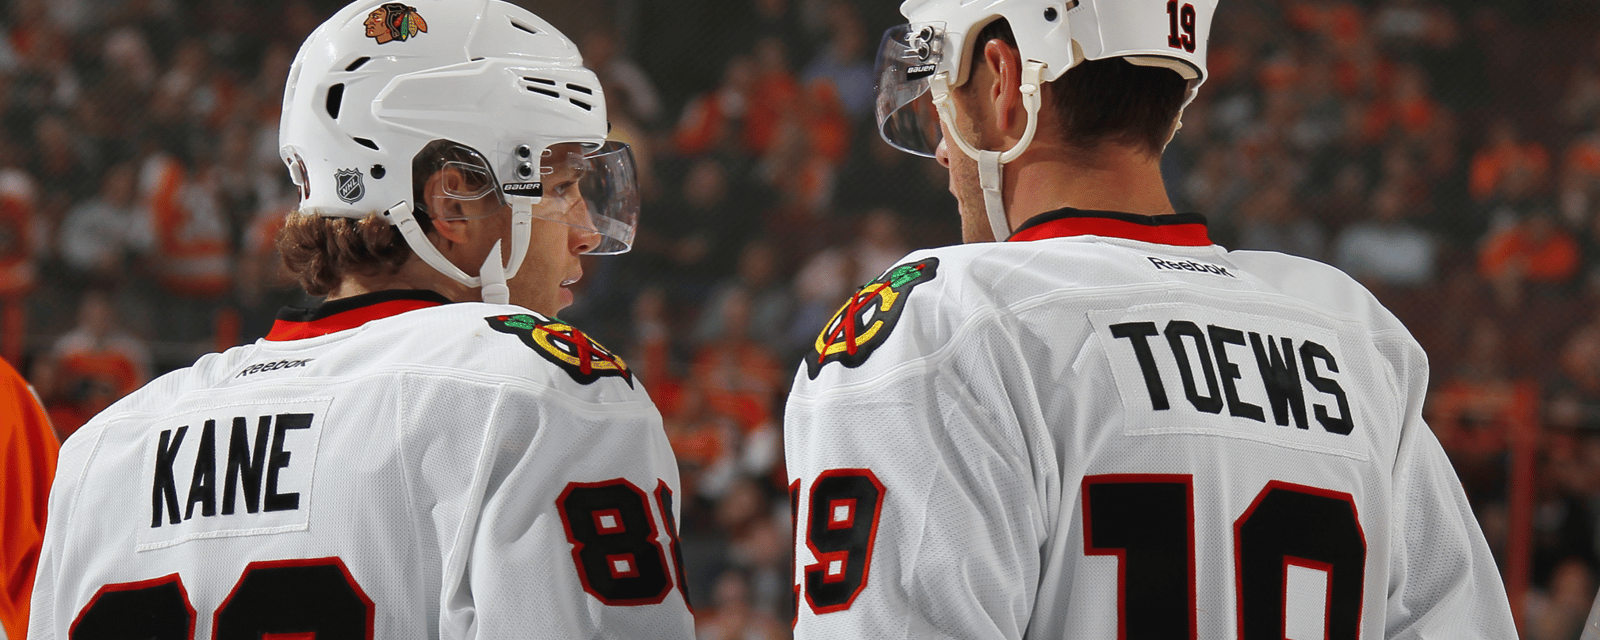 Futures of Jonathan Toews/Patrick Kane may have been leaked! 